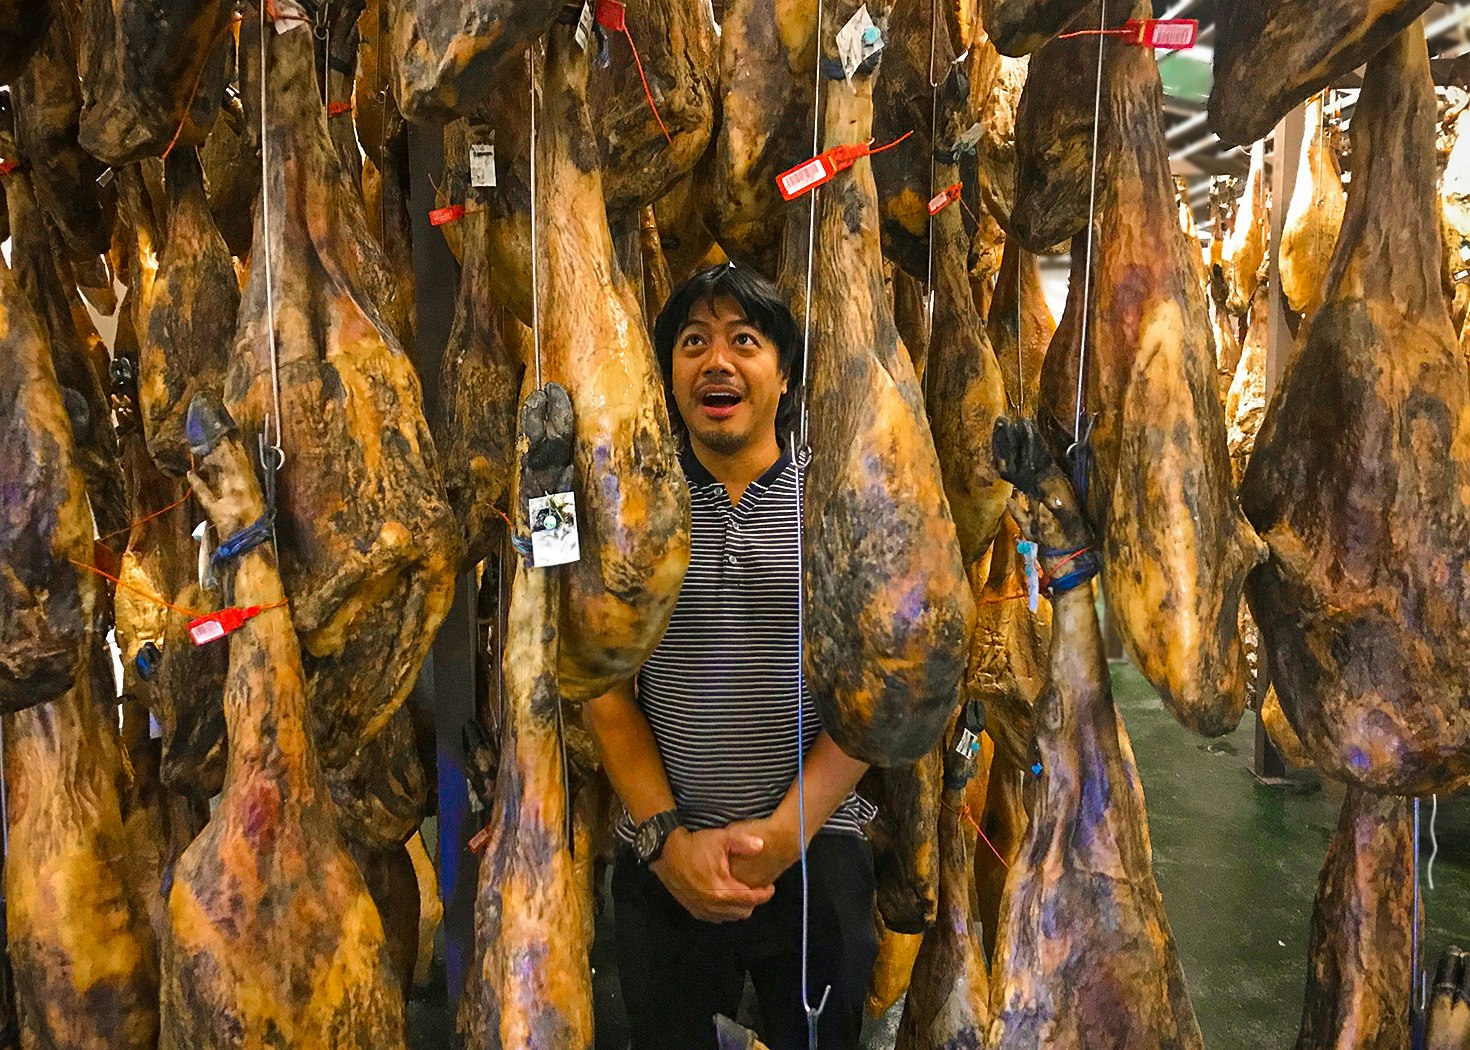 A man feigns surprise as he poses surrounded by suspended jamon iberico